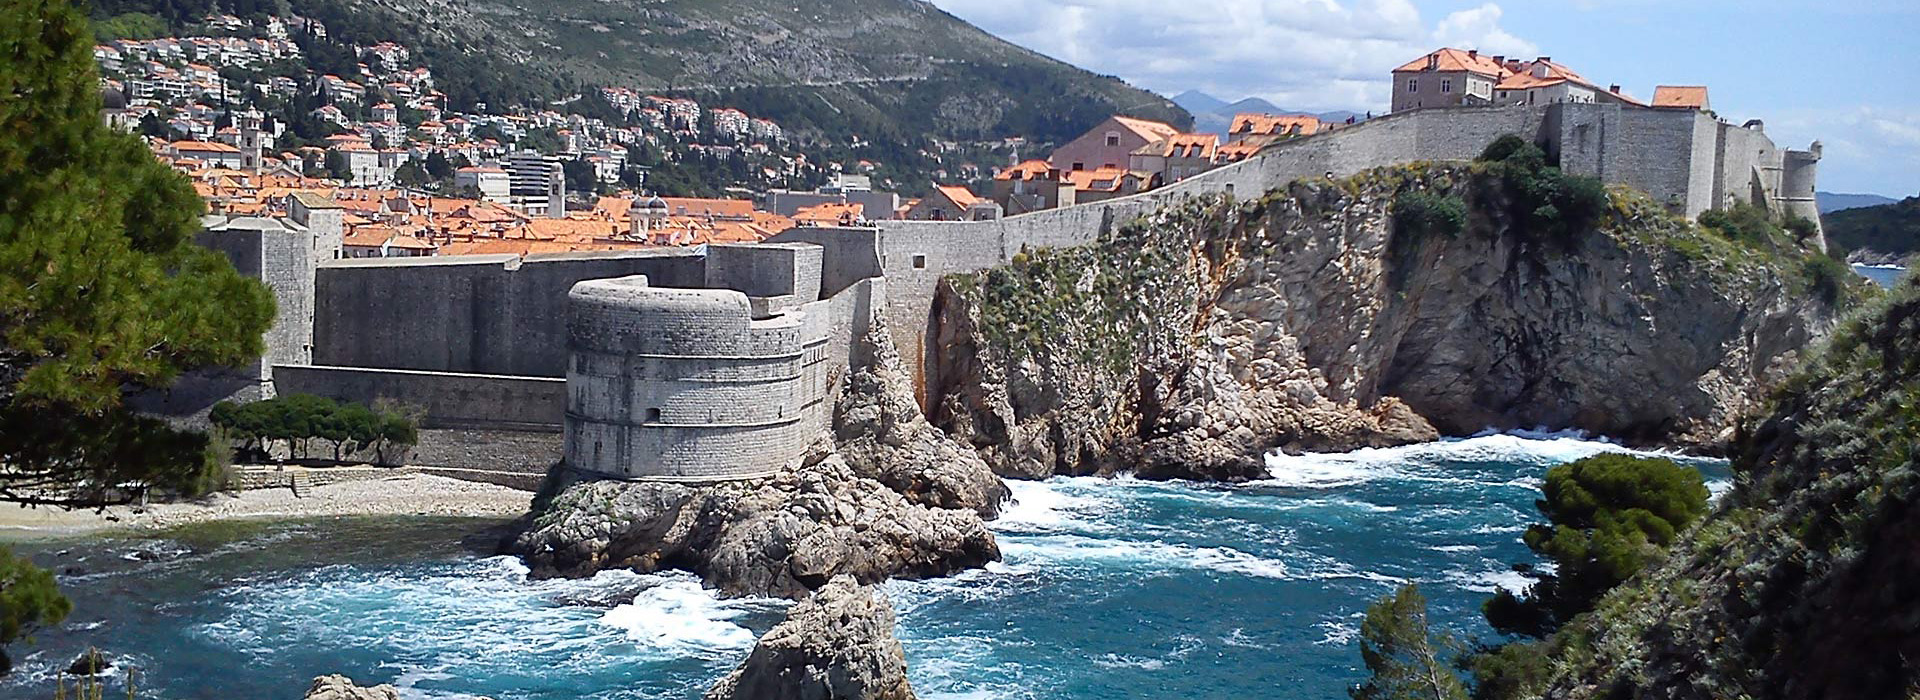 Walking and cultural Balkans discovery trip - Dubrovnik